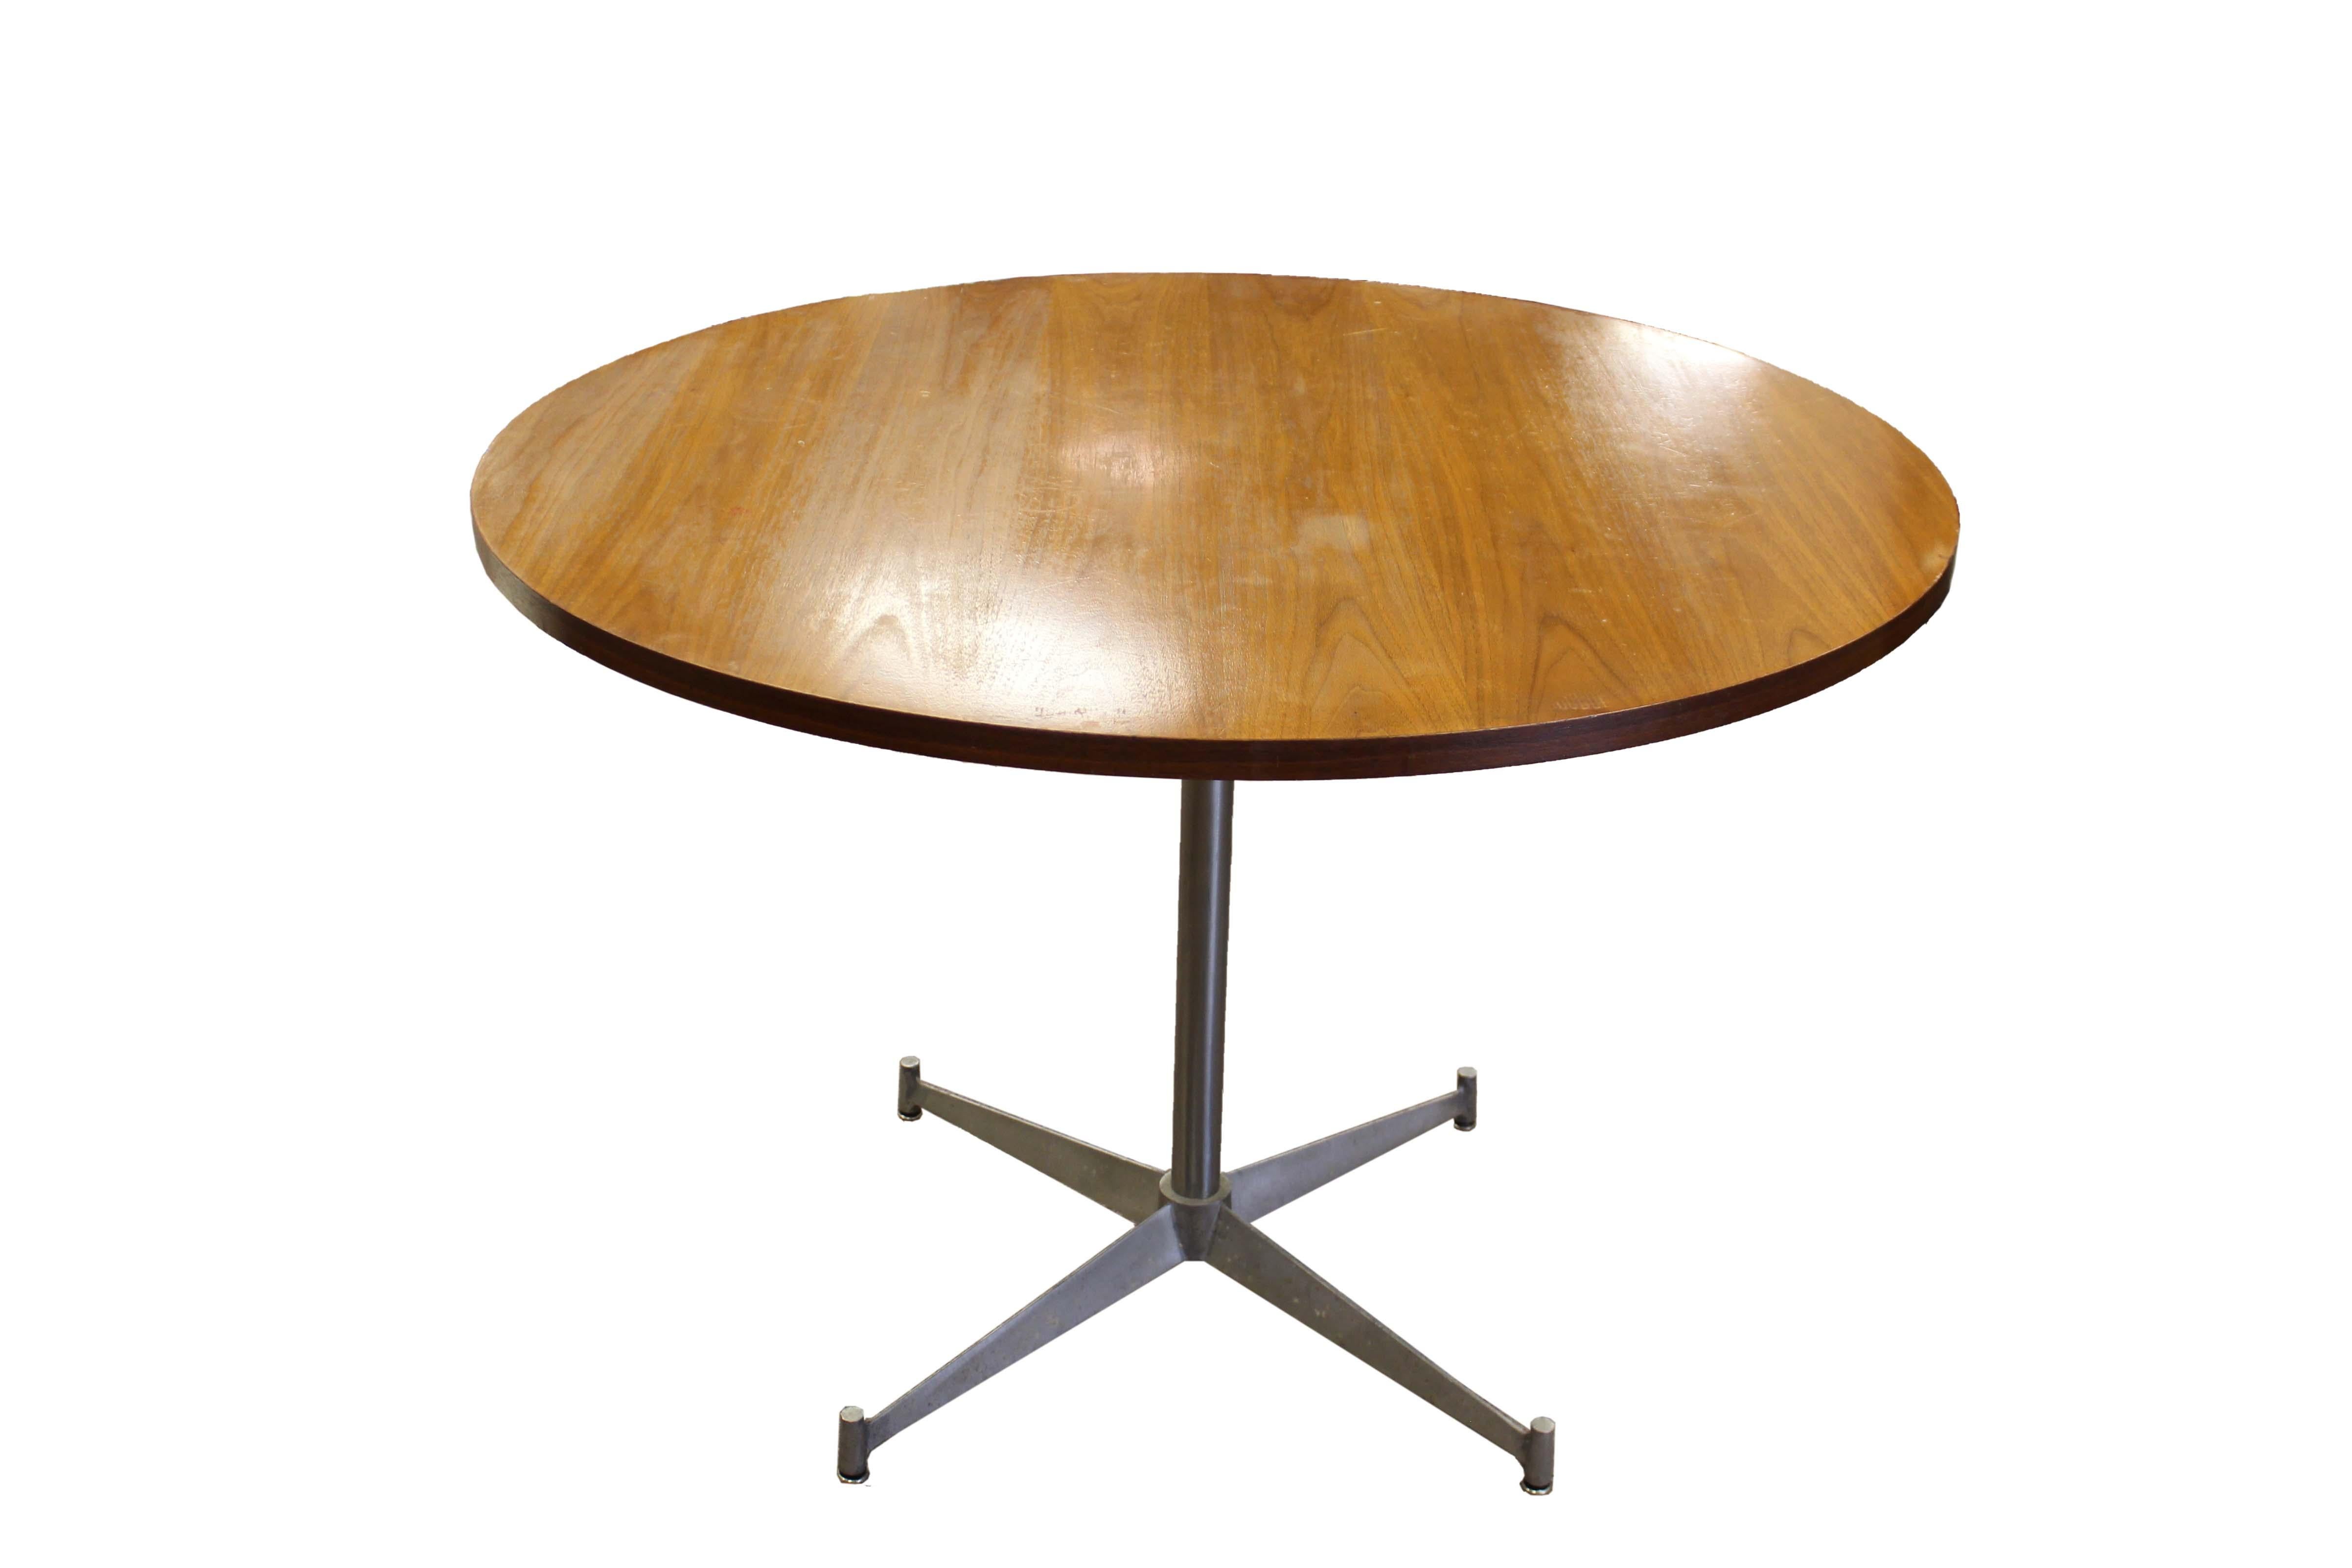 Le Shoppe Too presents an iconic Herman Miller dinette game table in walnut wood with a metal star base. In vintage condition. Dimensions: 42